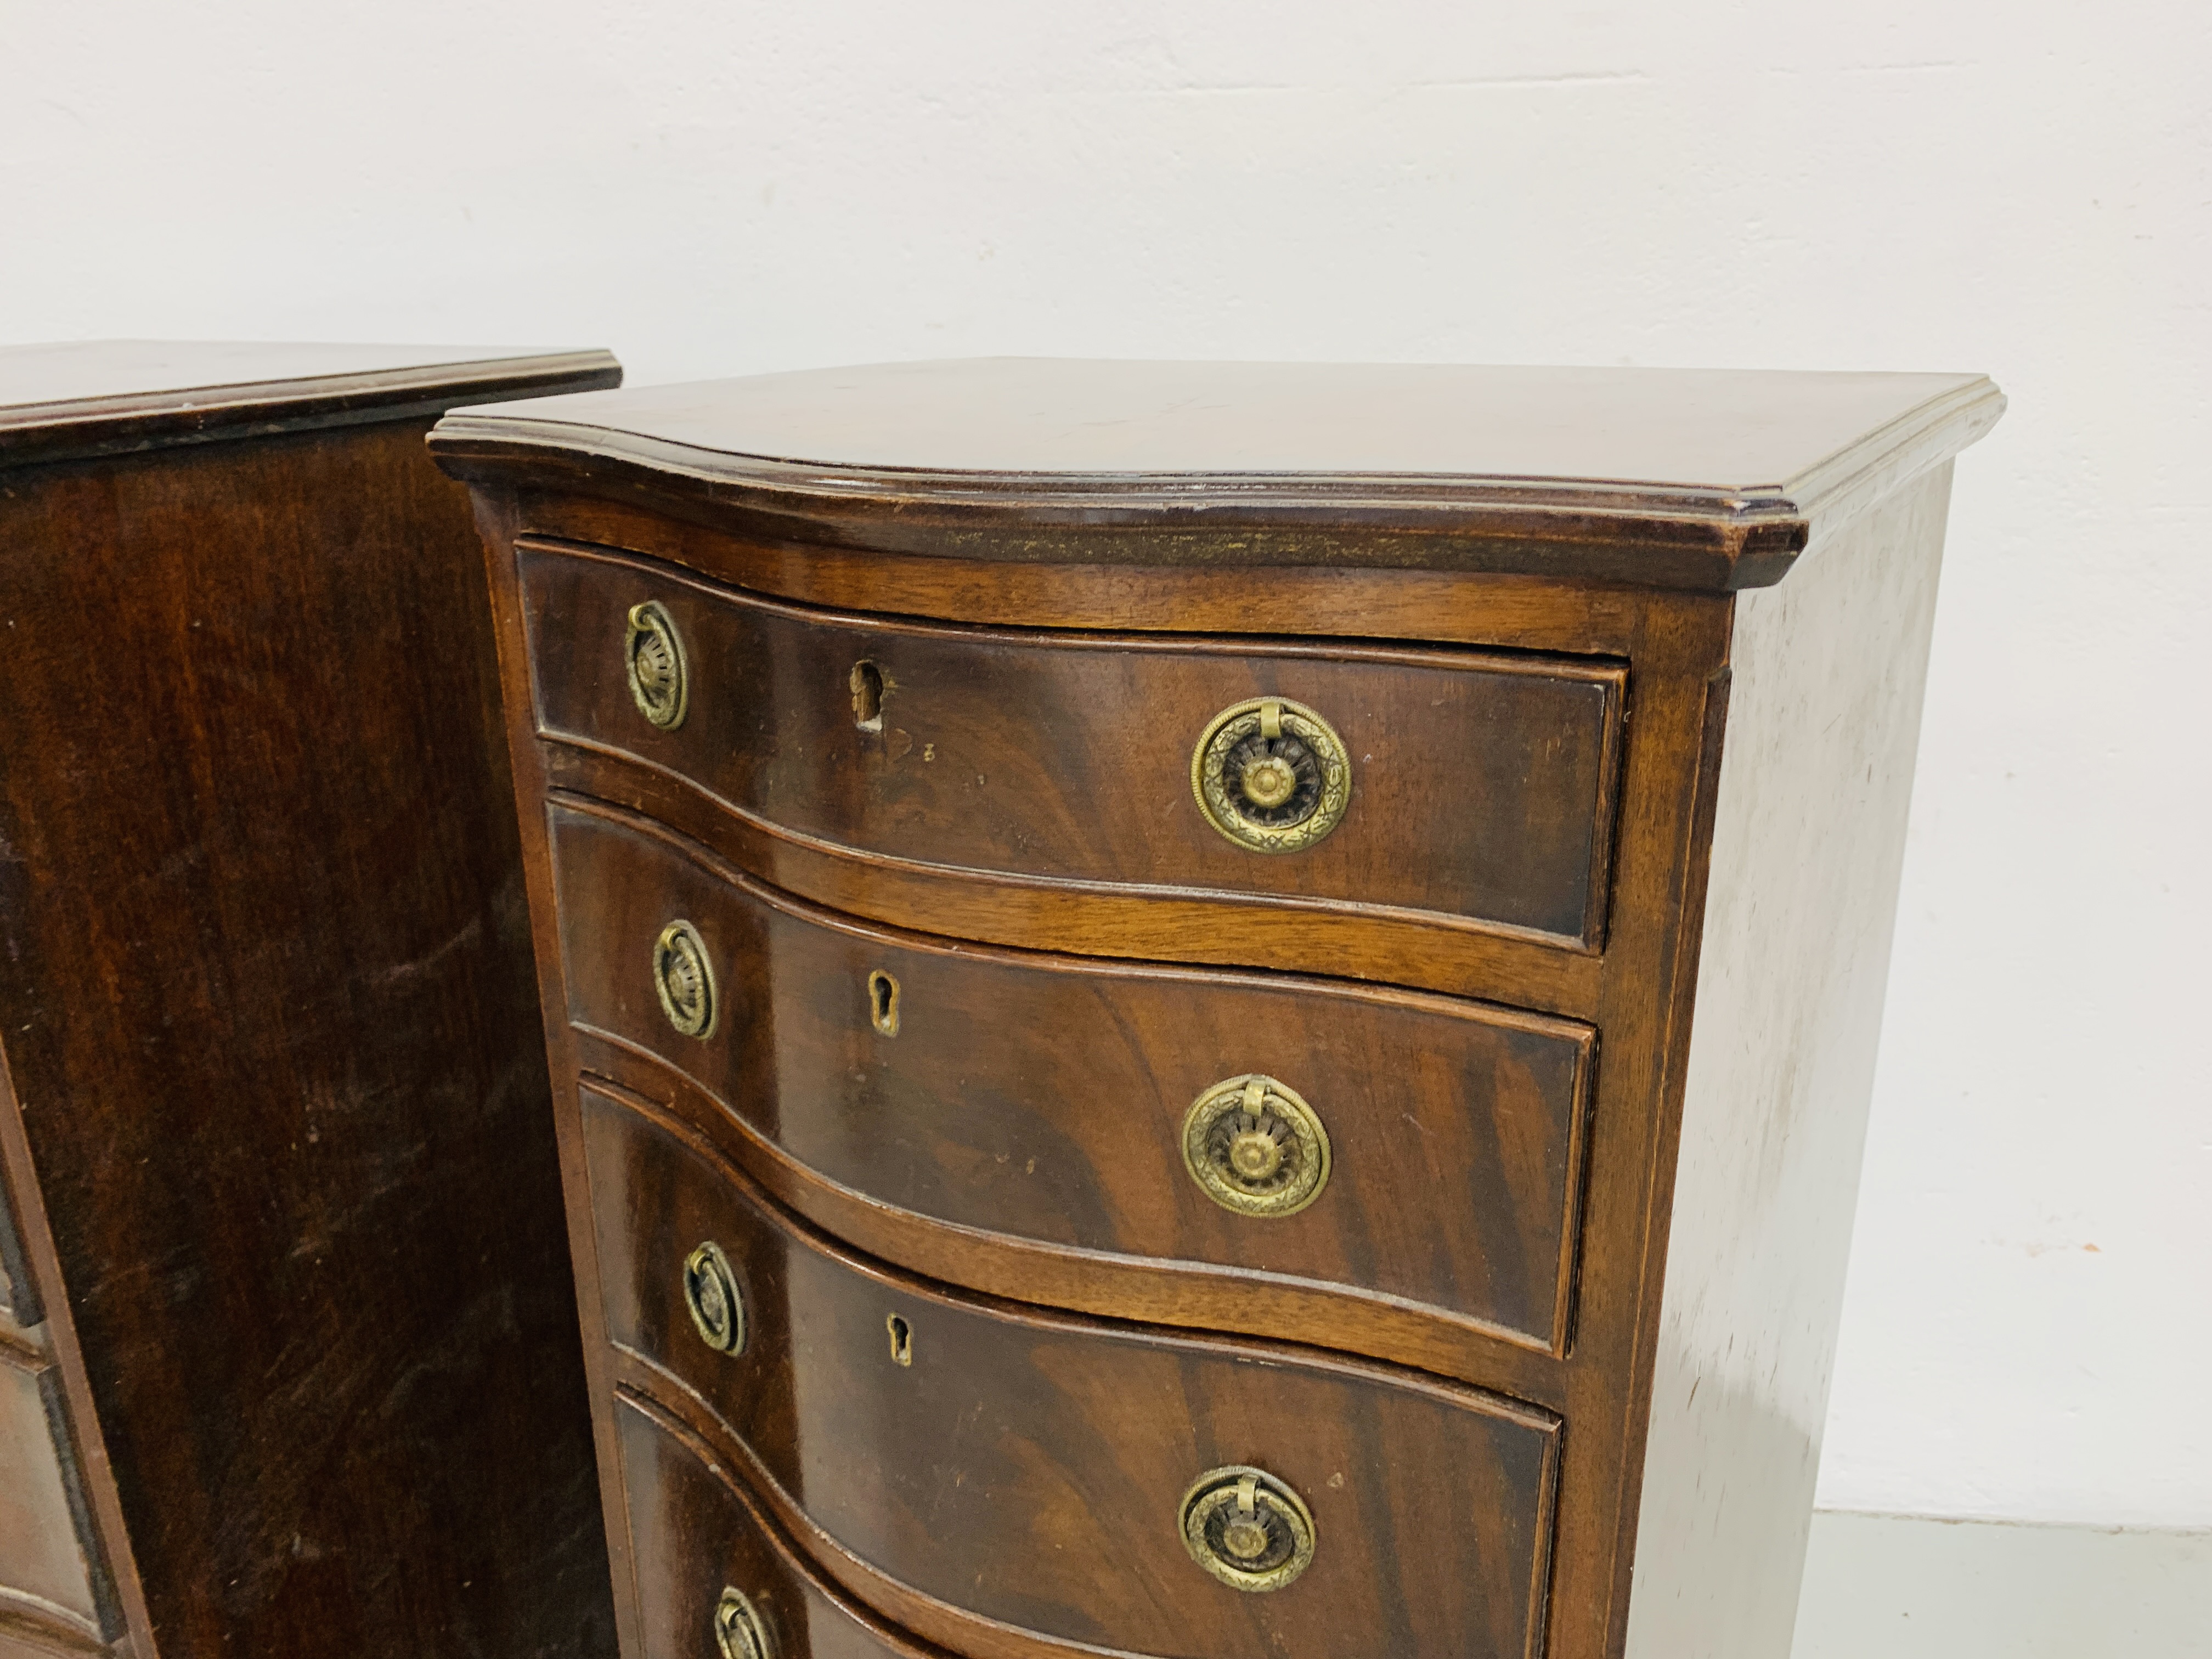 A PAIR OF REPRODUCTION MAHOGANY FINISH SERPENTINE FIVE DRAWER CHESTS - Image 4 of 10